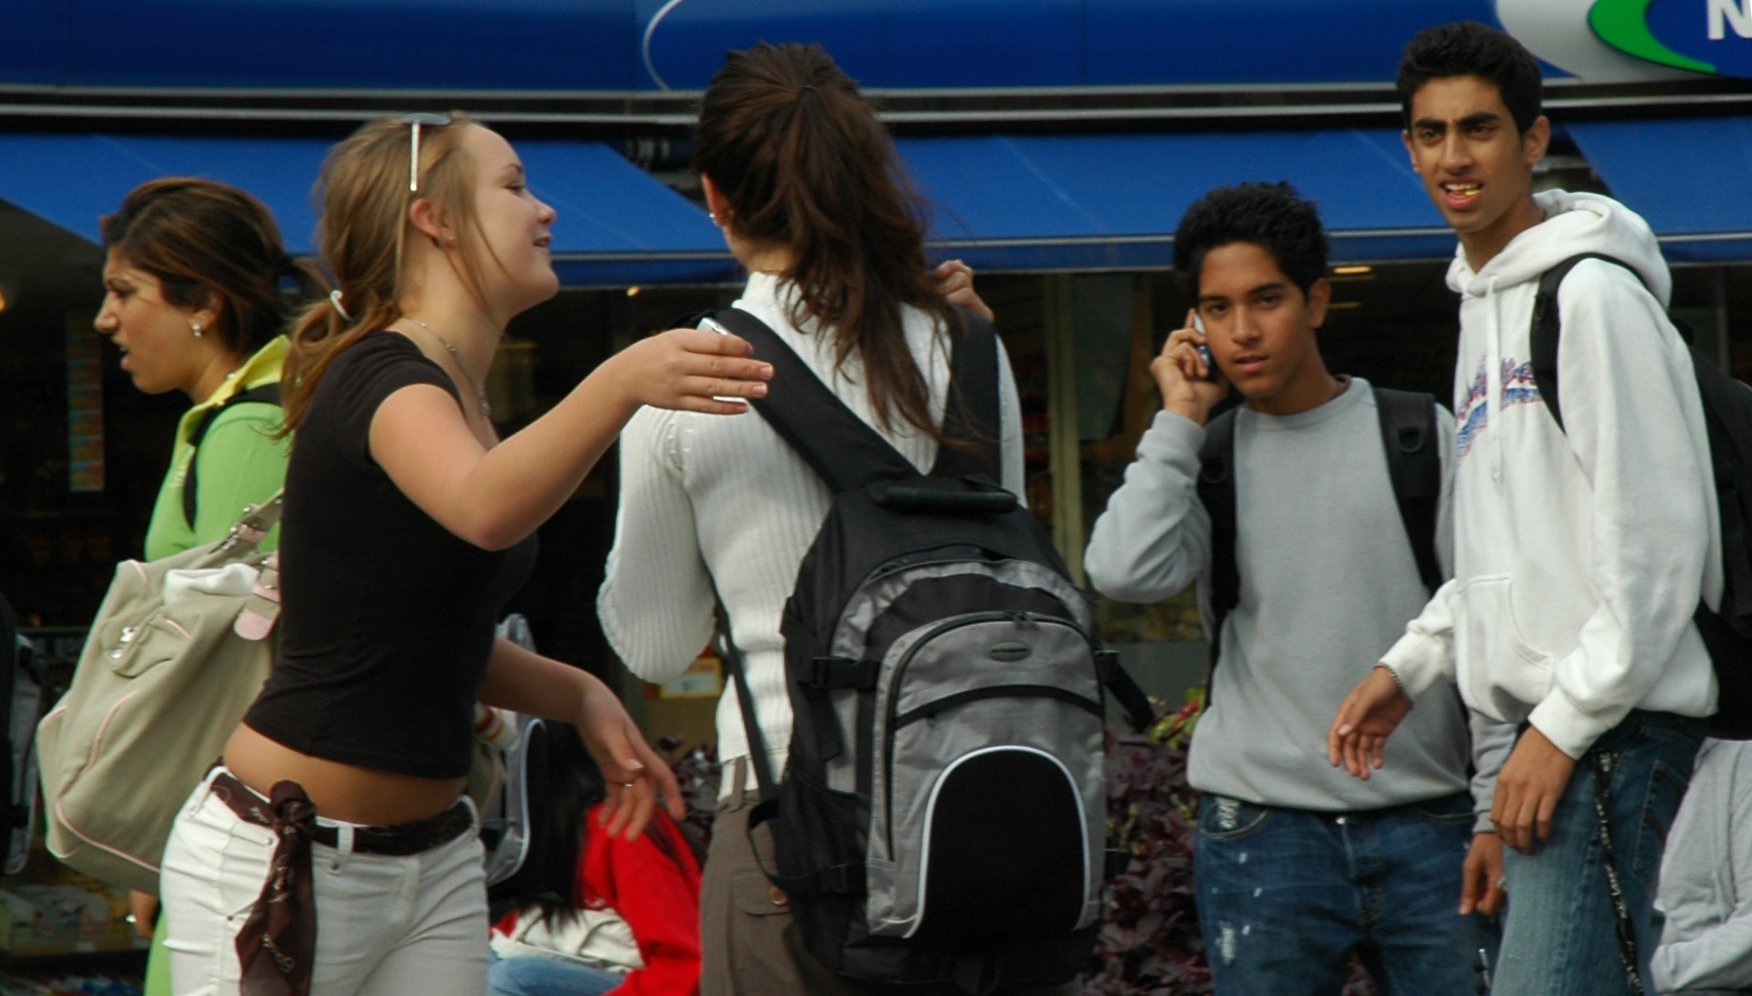 Youth from diverse backgrounds interacting and talking. Some are wearing backpacks, and one is talking on a cell phone.